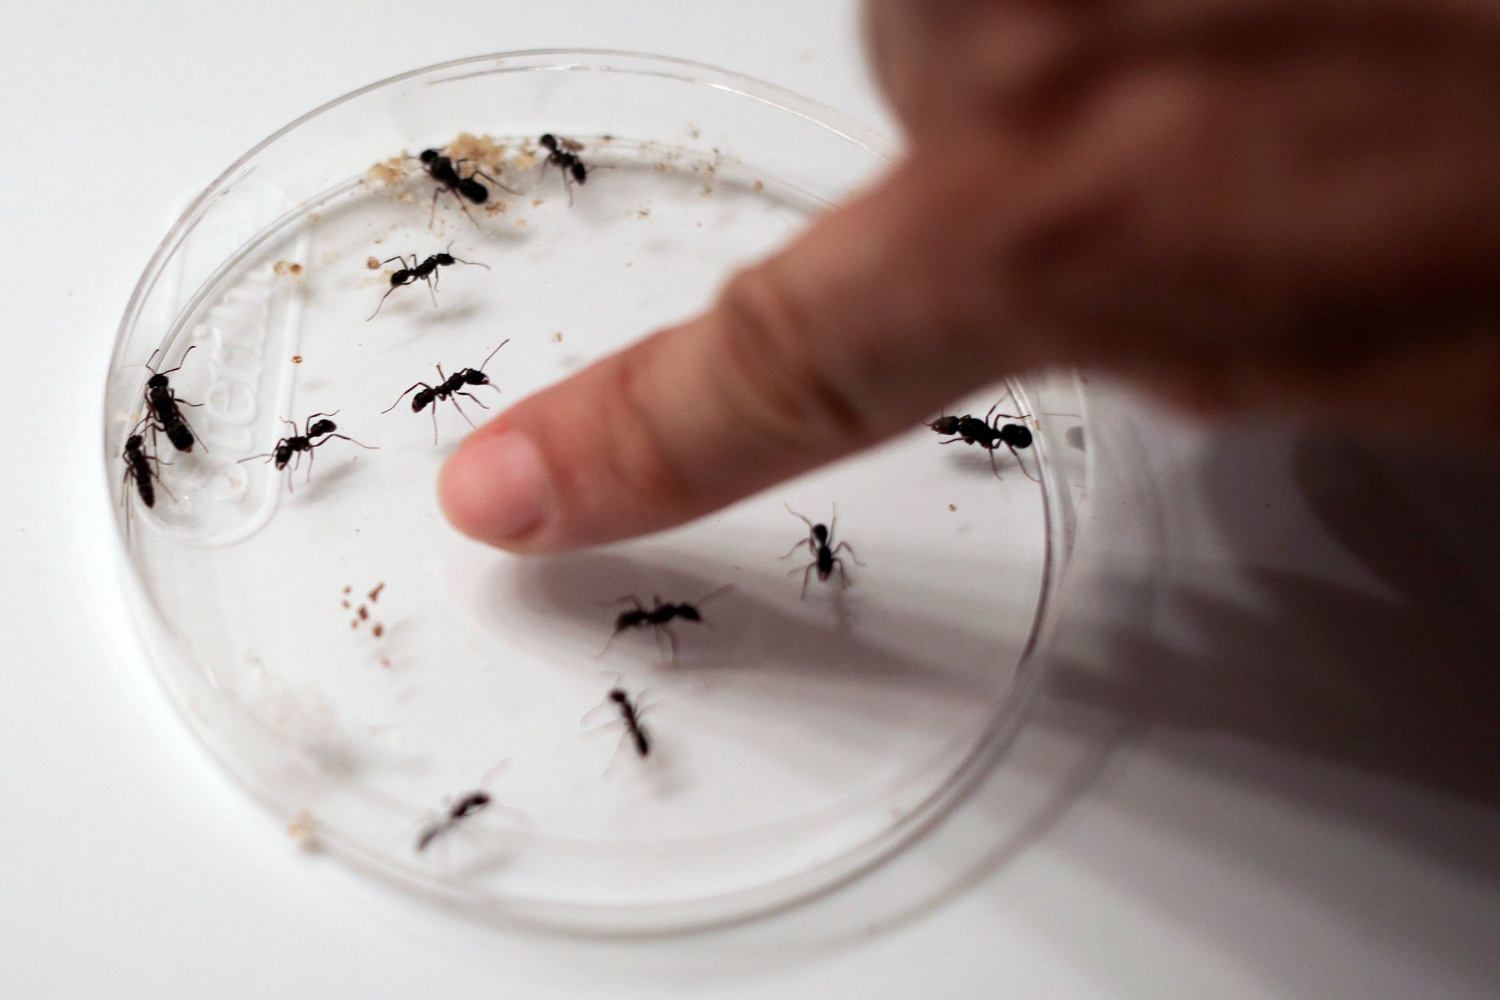 Ants Detect Cancer Tumors Through Smelling Patients' Urine | Tech Times